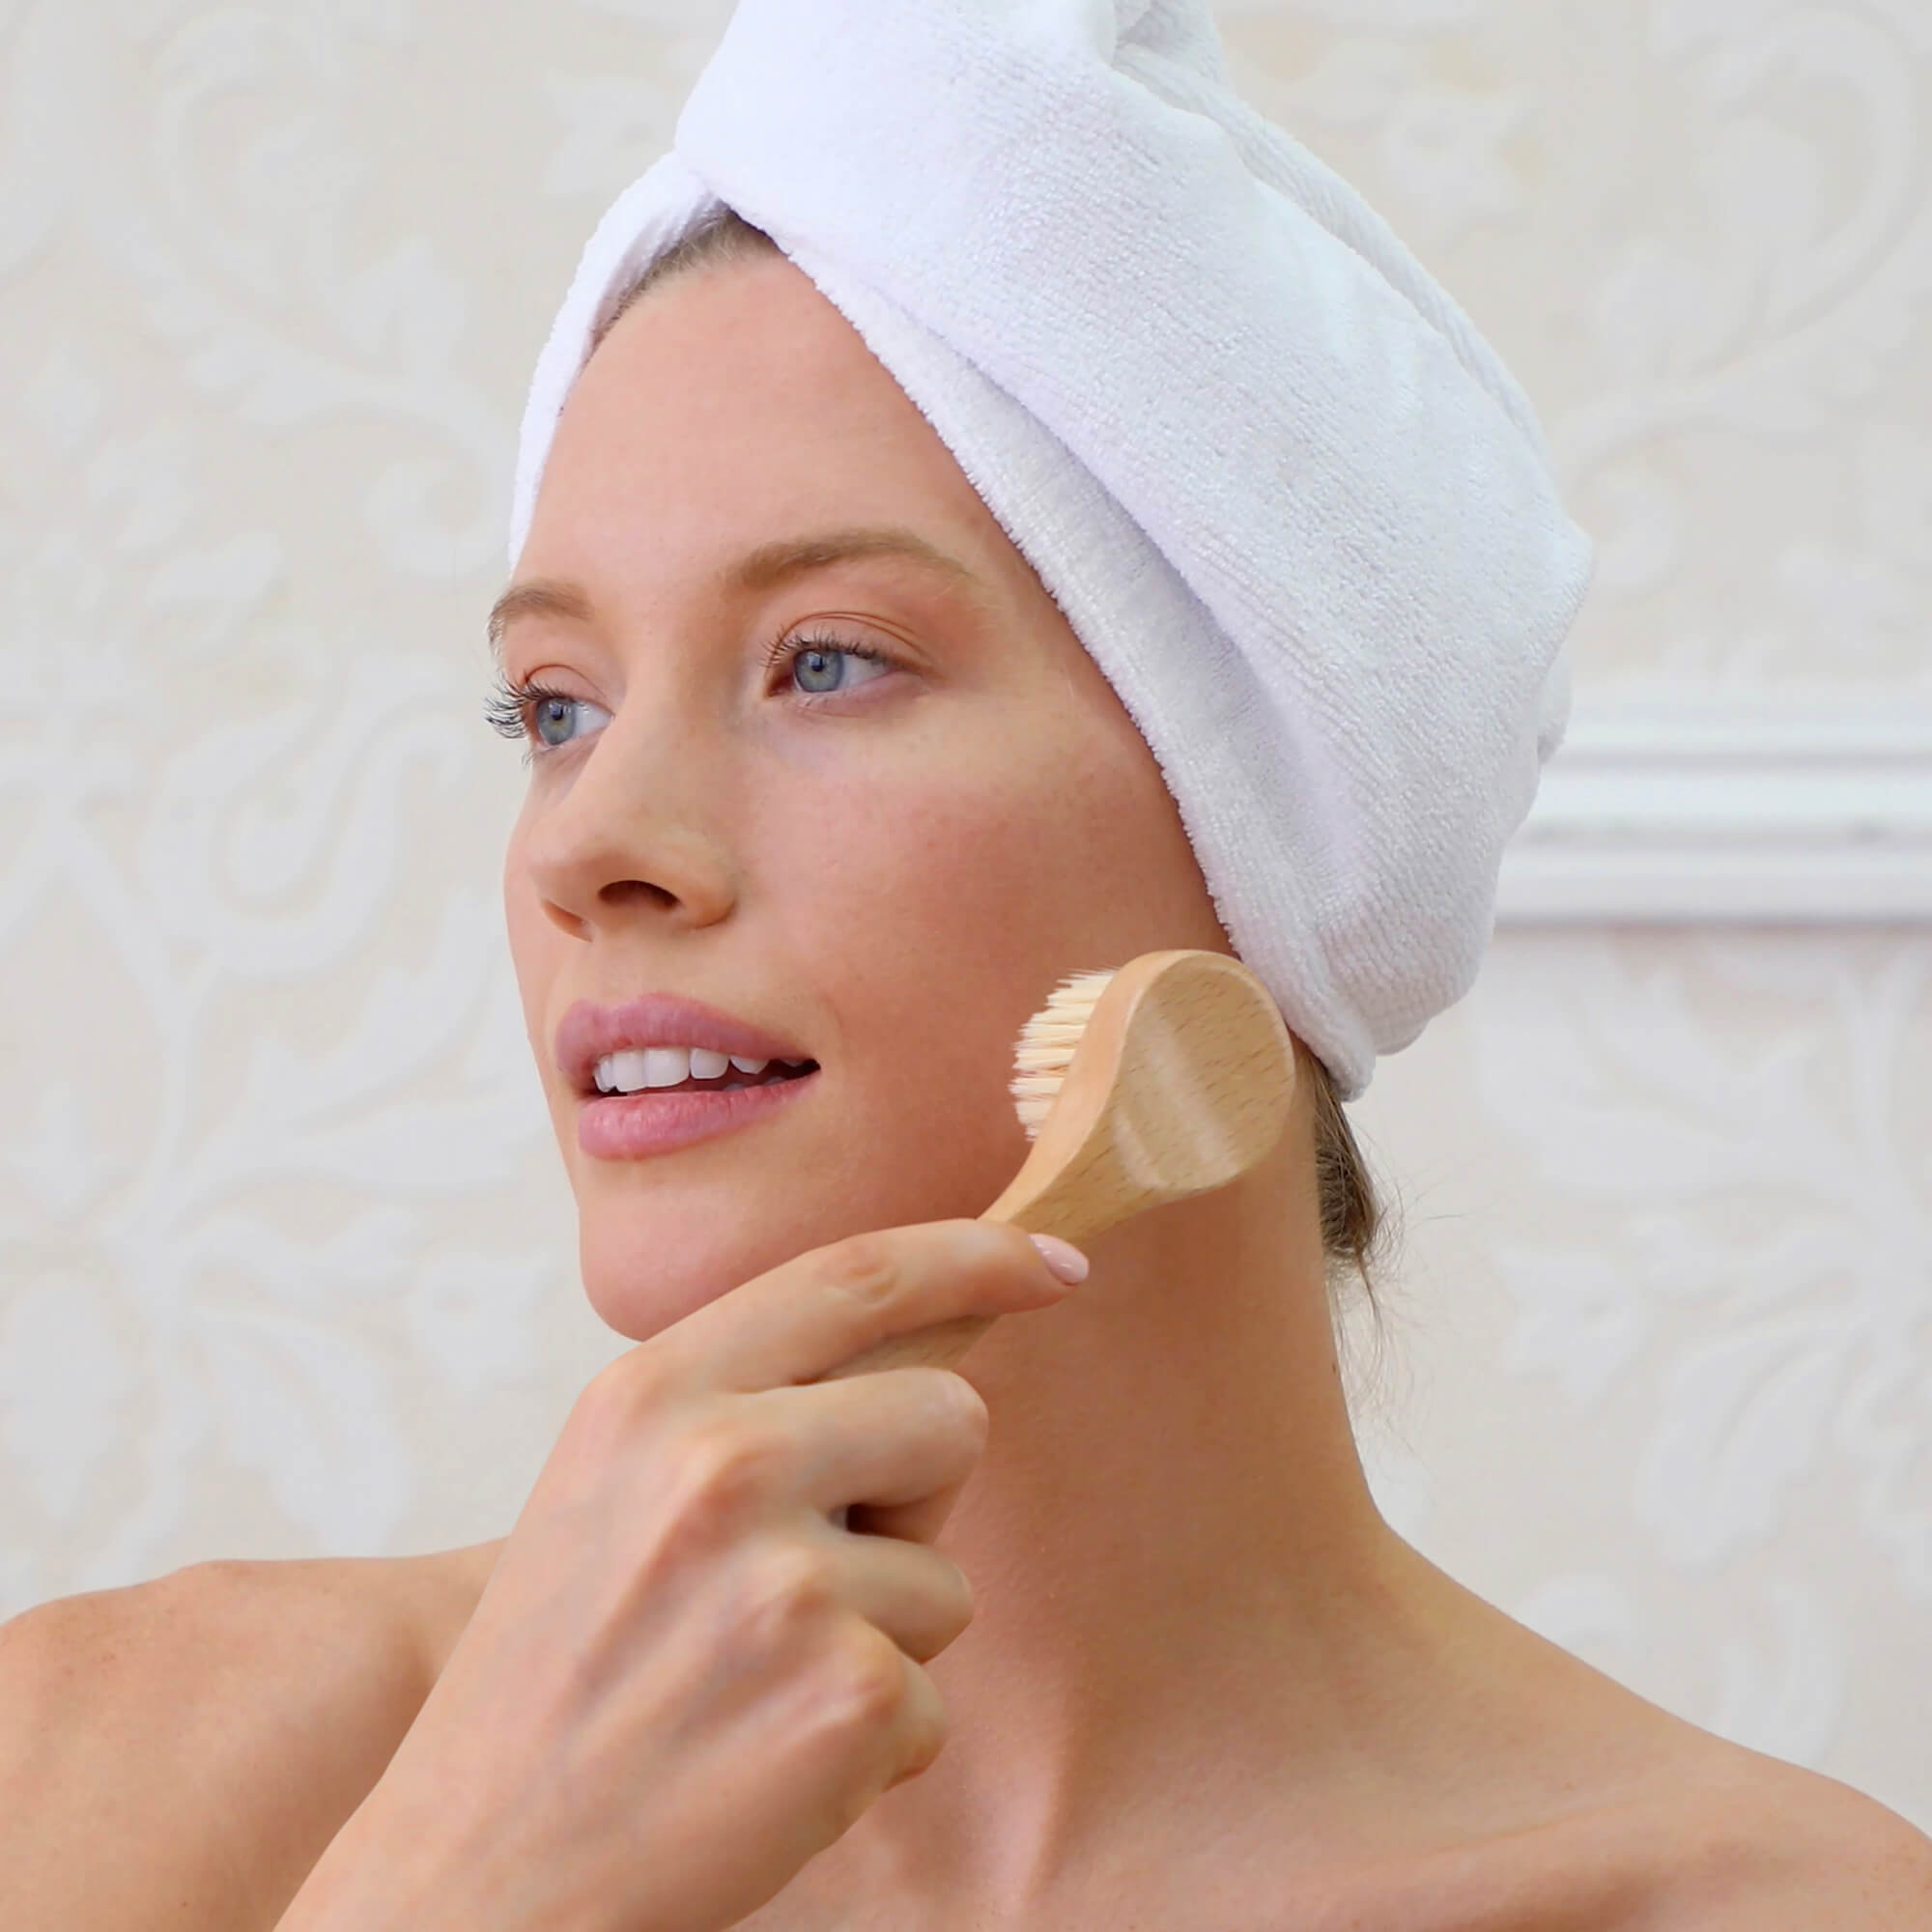 How to: Daily Facial Dry Brush